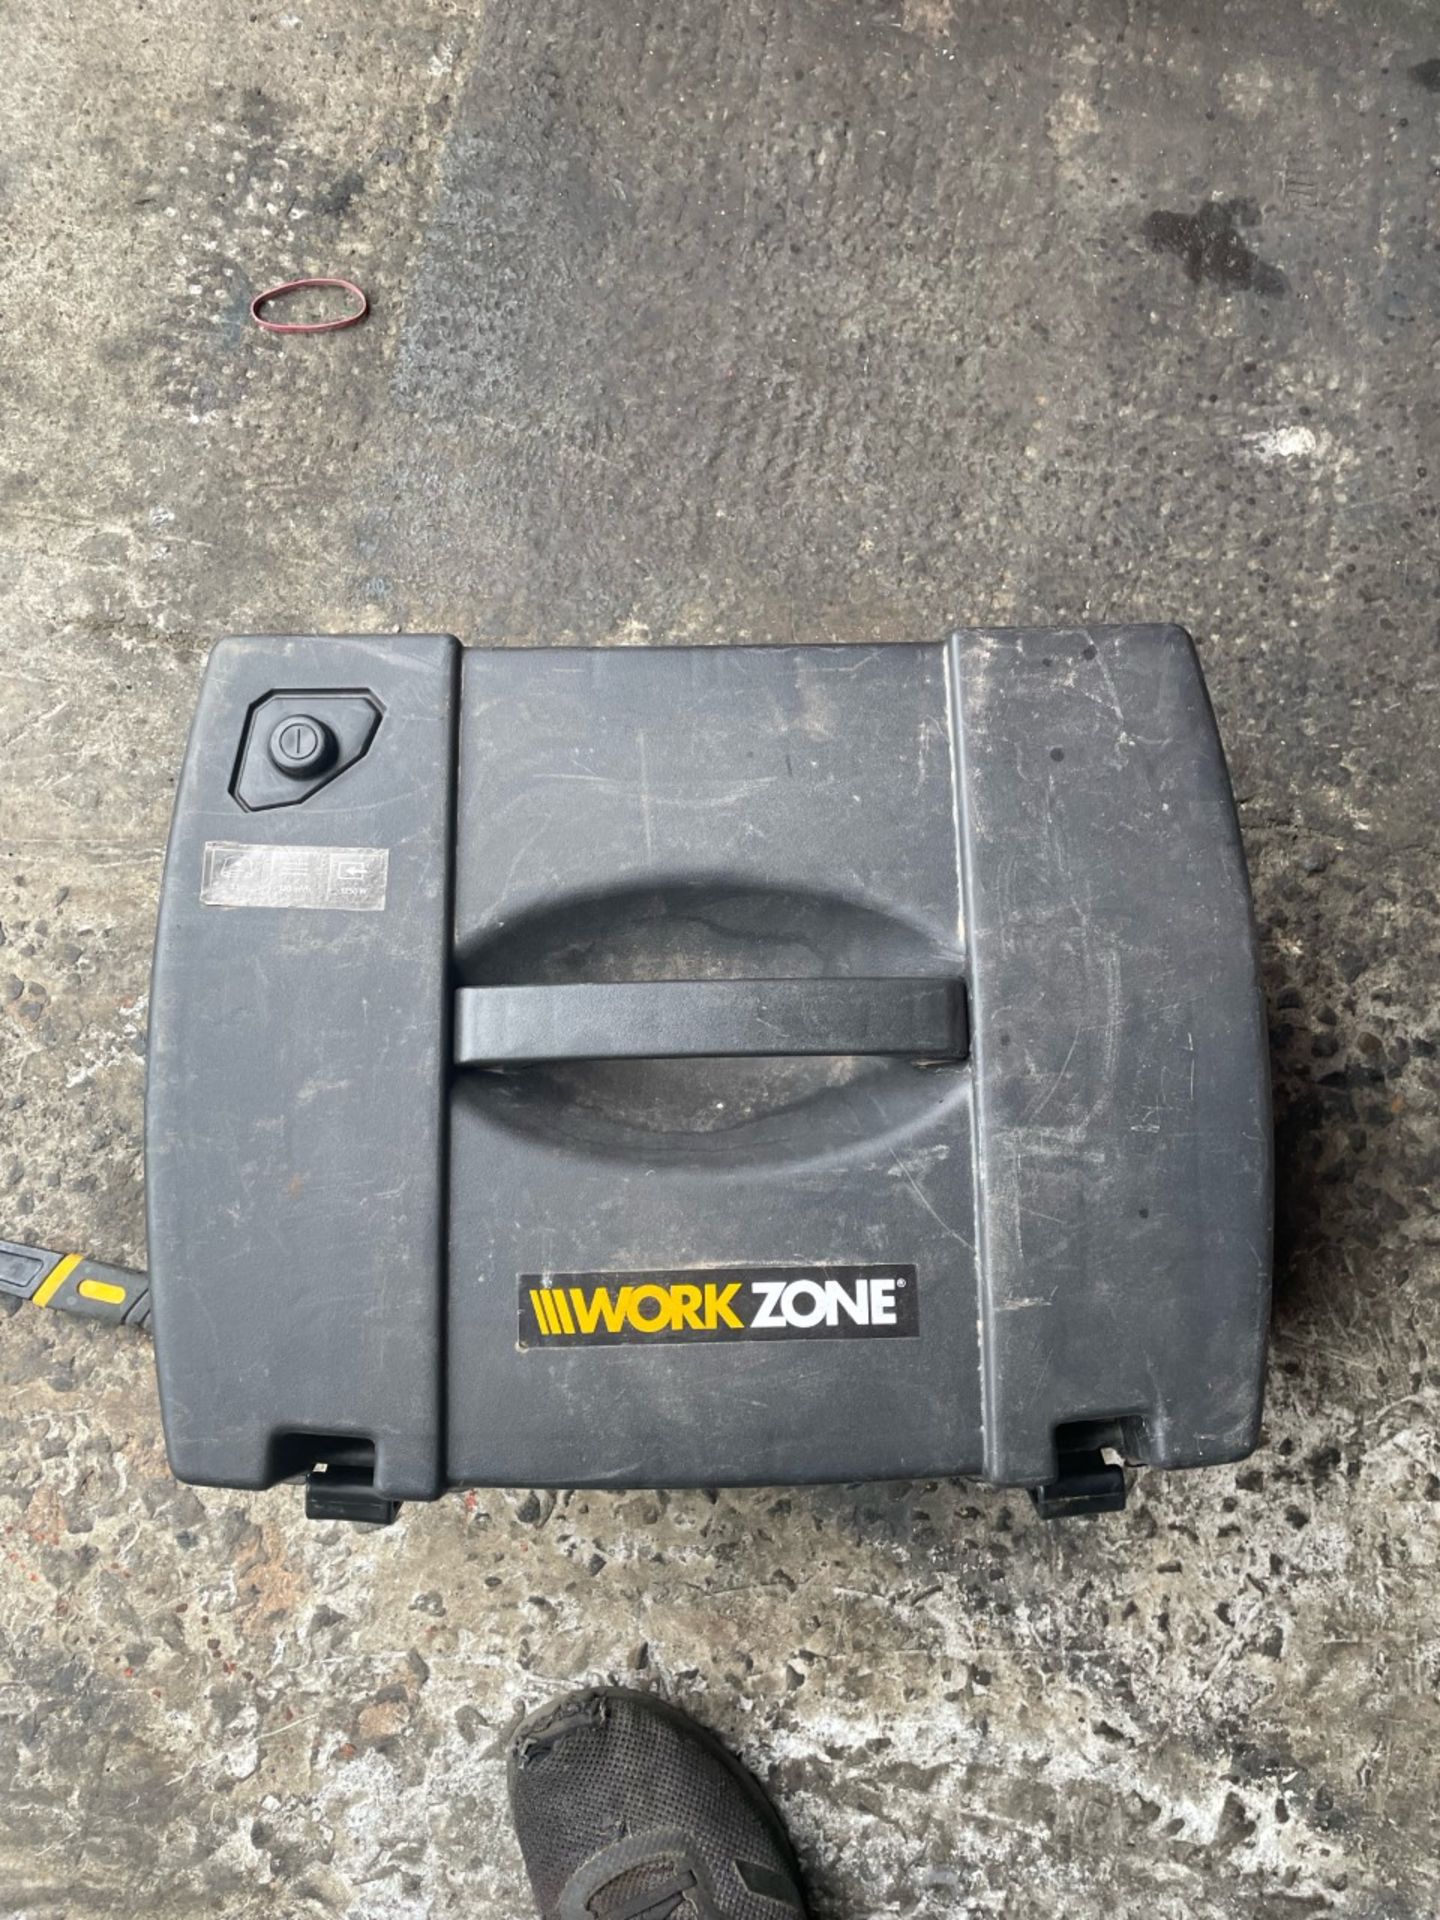 Workzone household electric blower vacuum full working order - Image 3 of 3